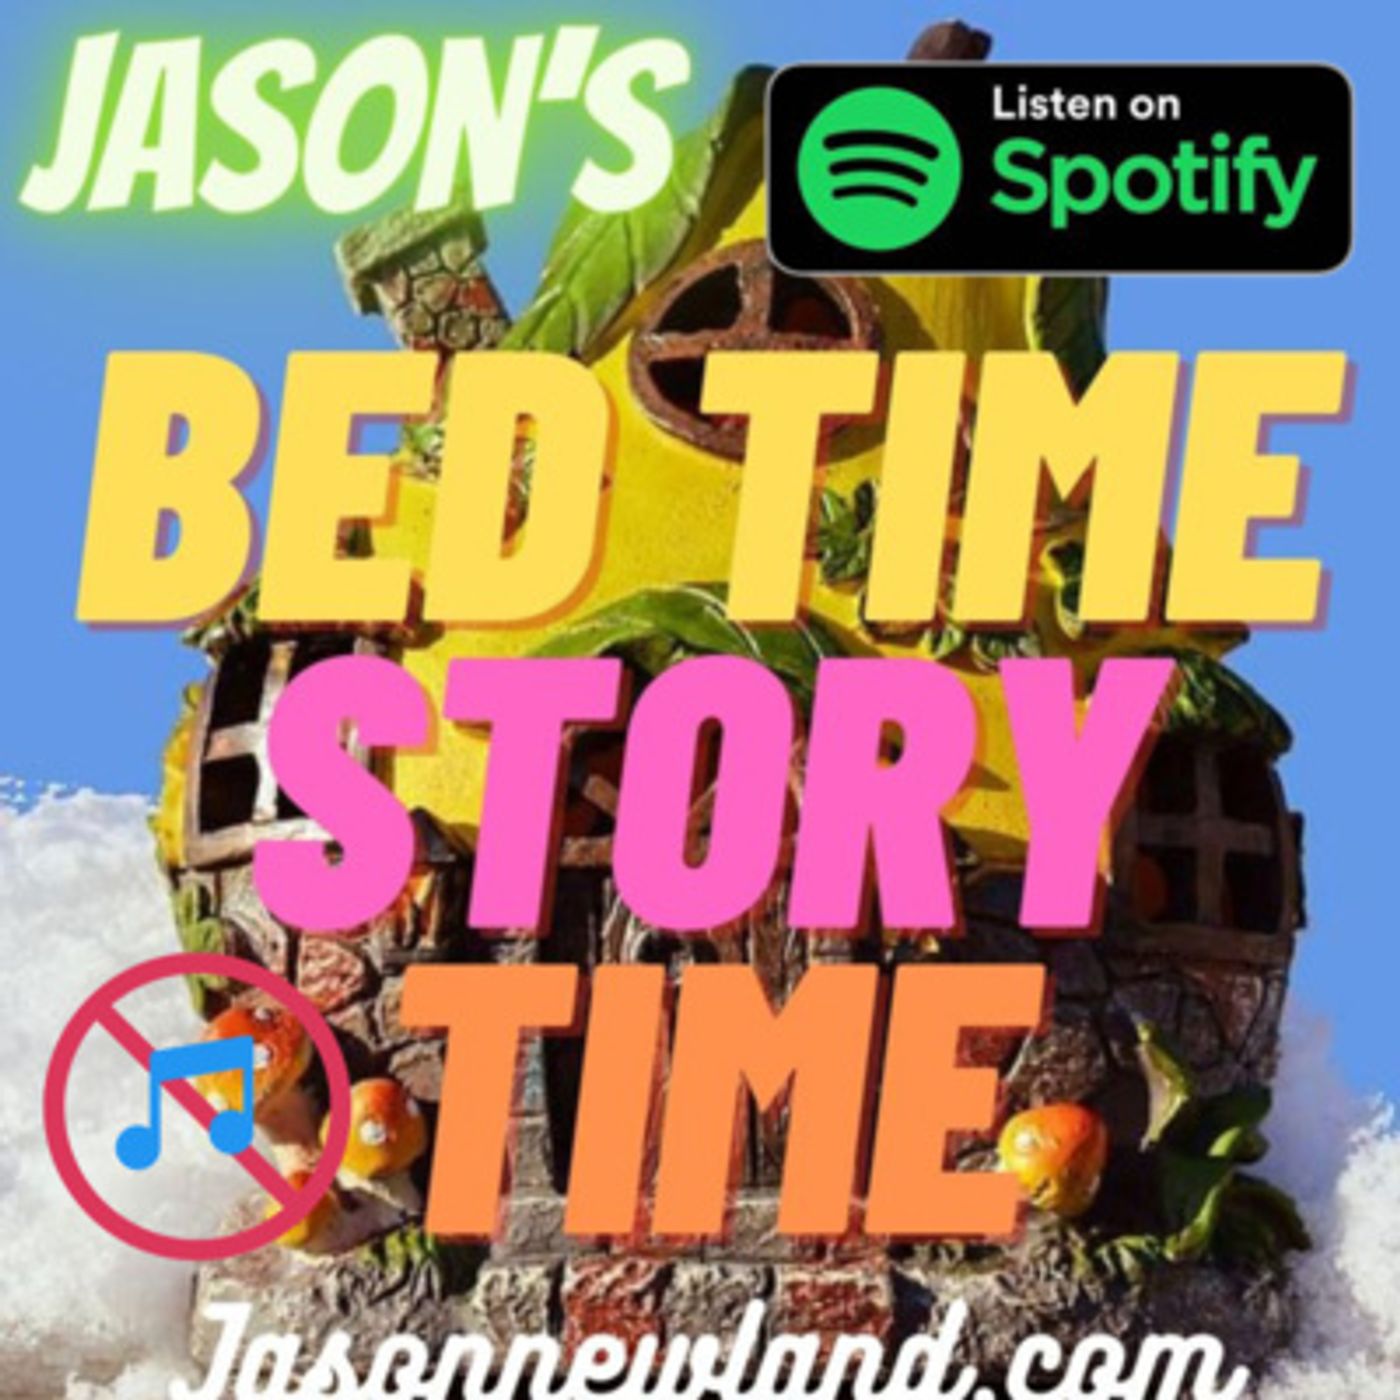 #16 MOLLY WHIPEMOUT - Jasons Bed Time Story Time